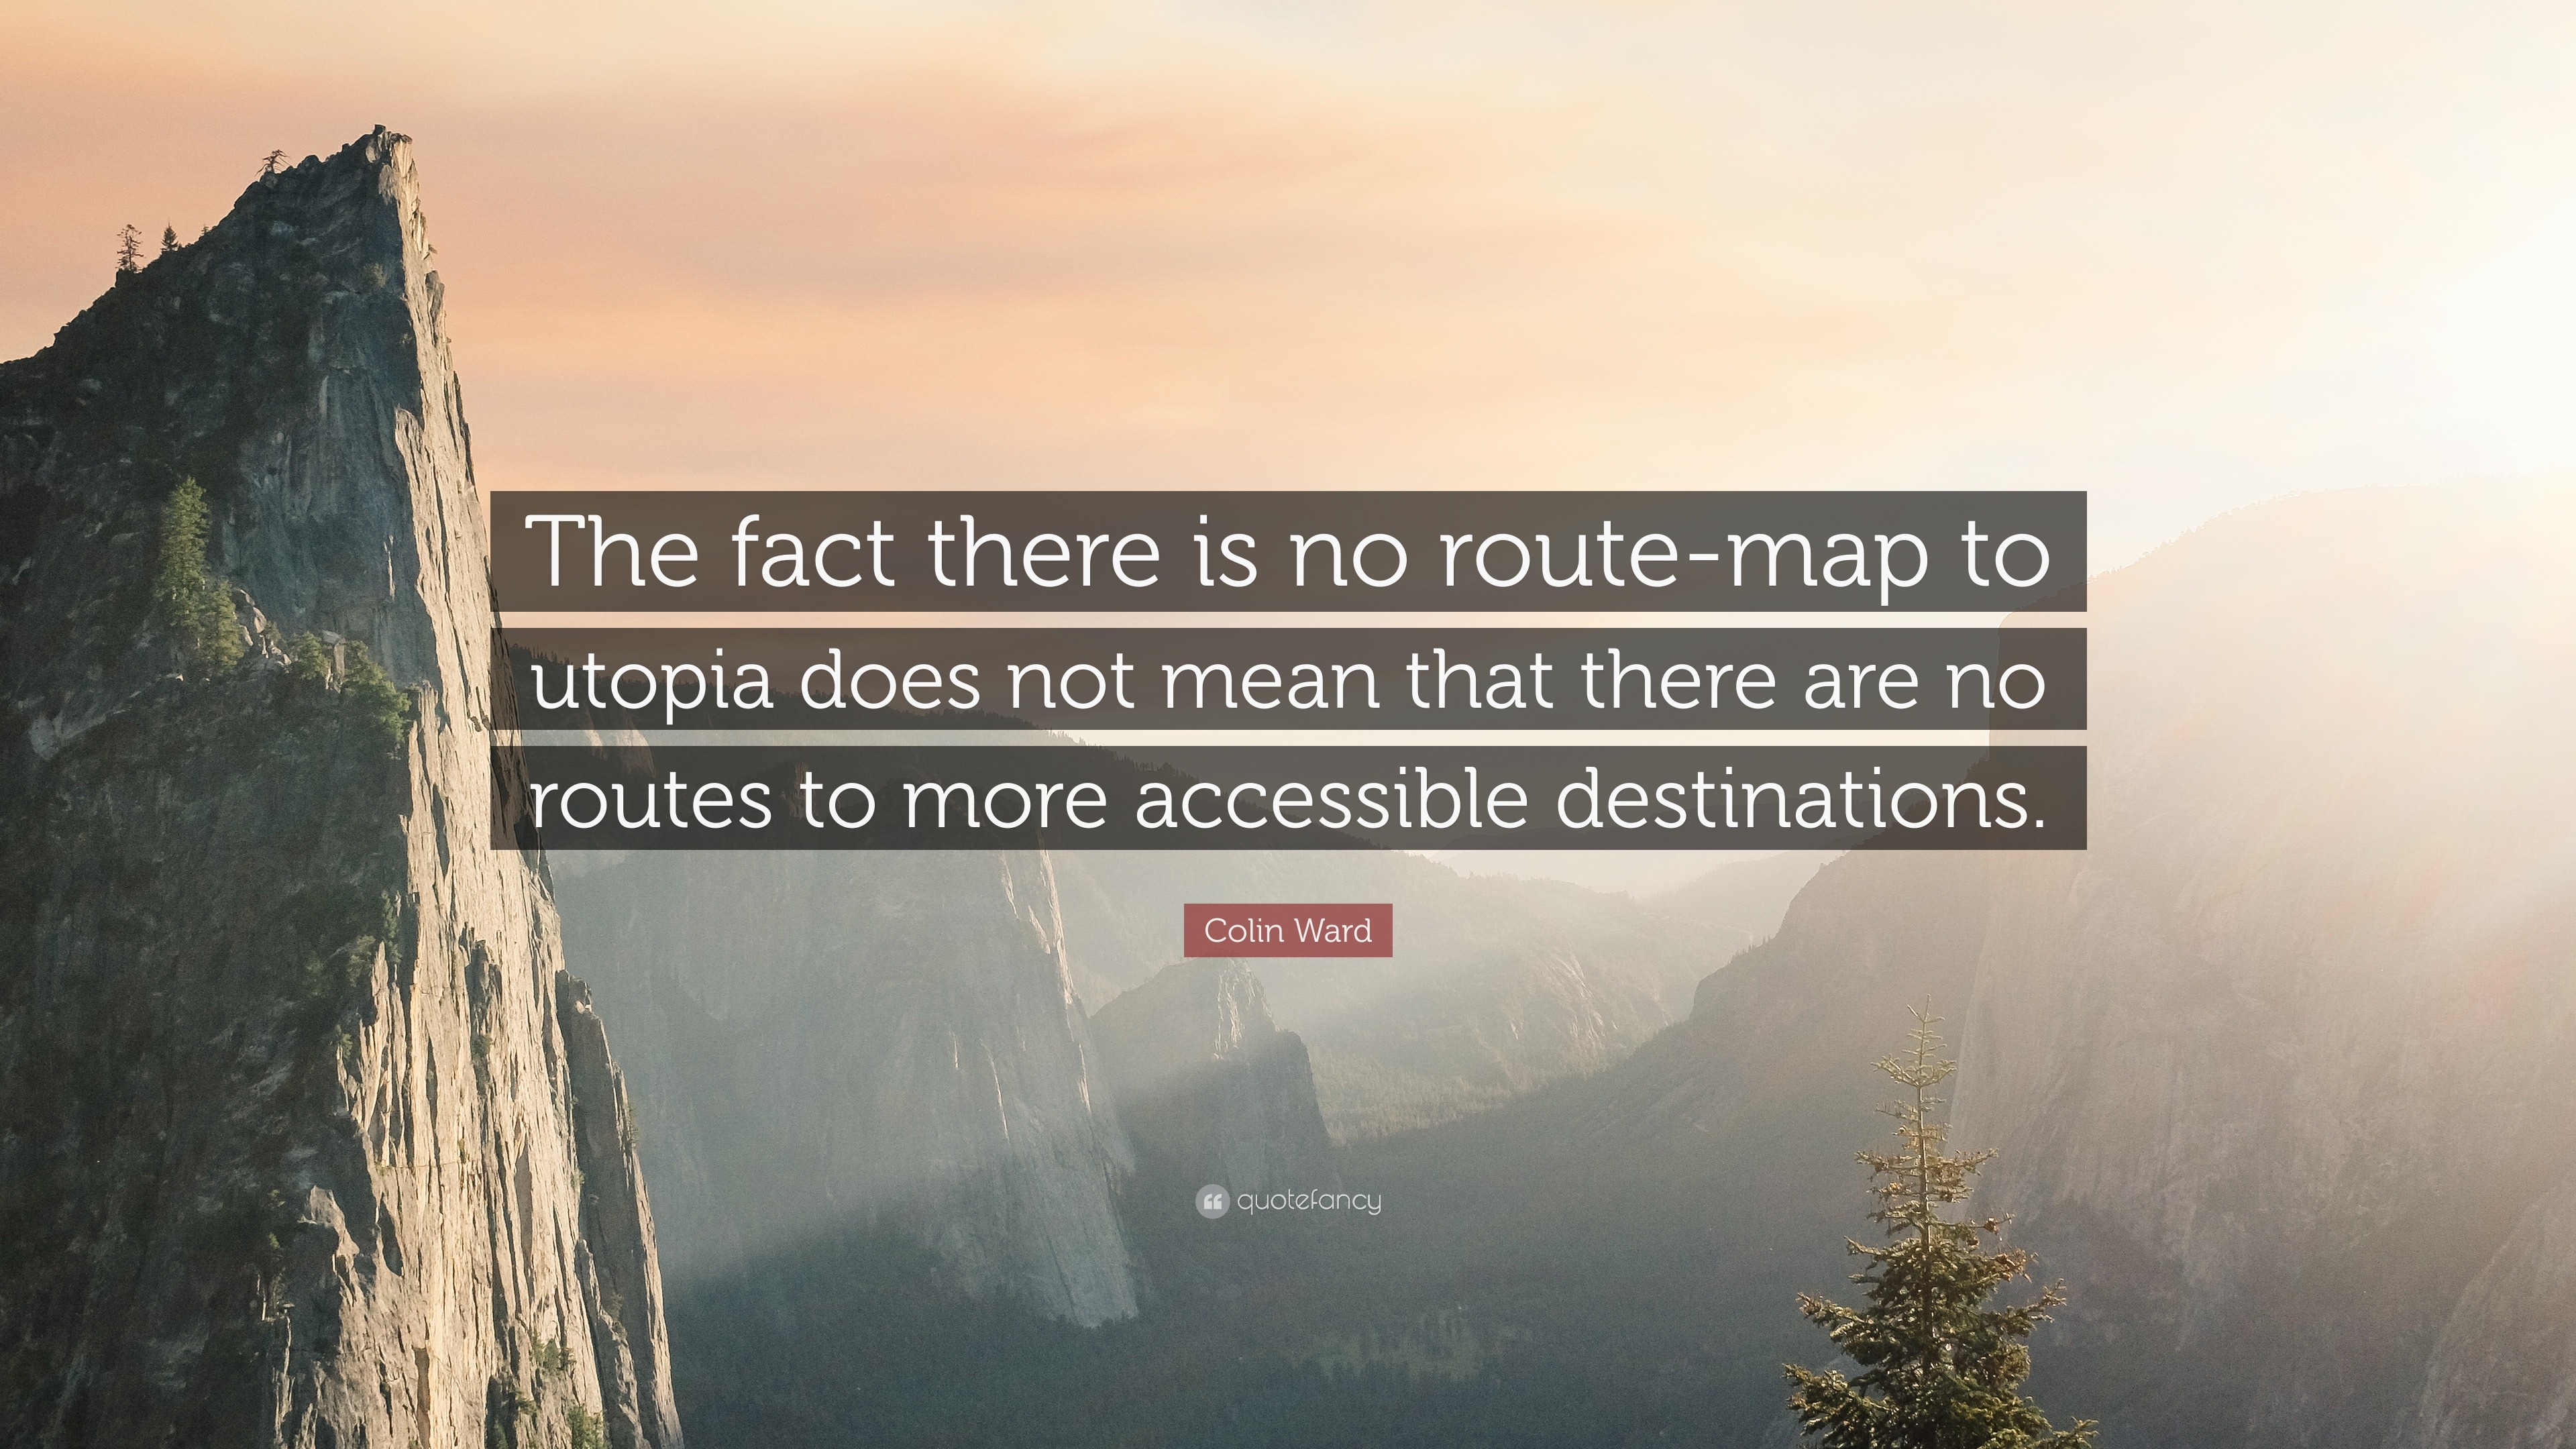 colin ward quote: “the fact there is no route-map to utopia does not